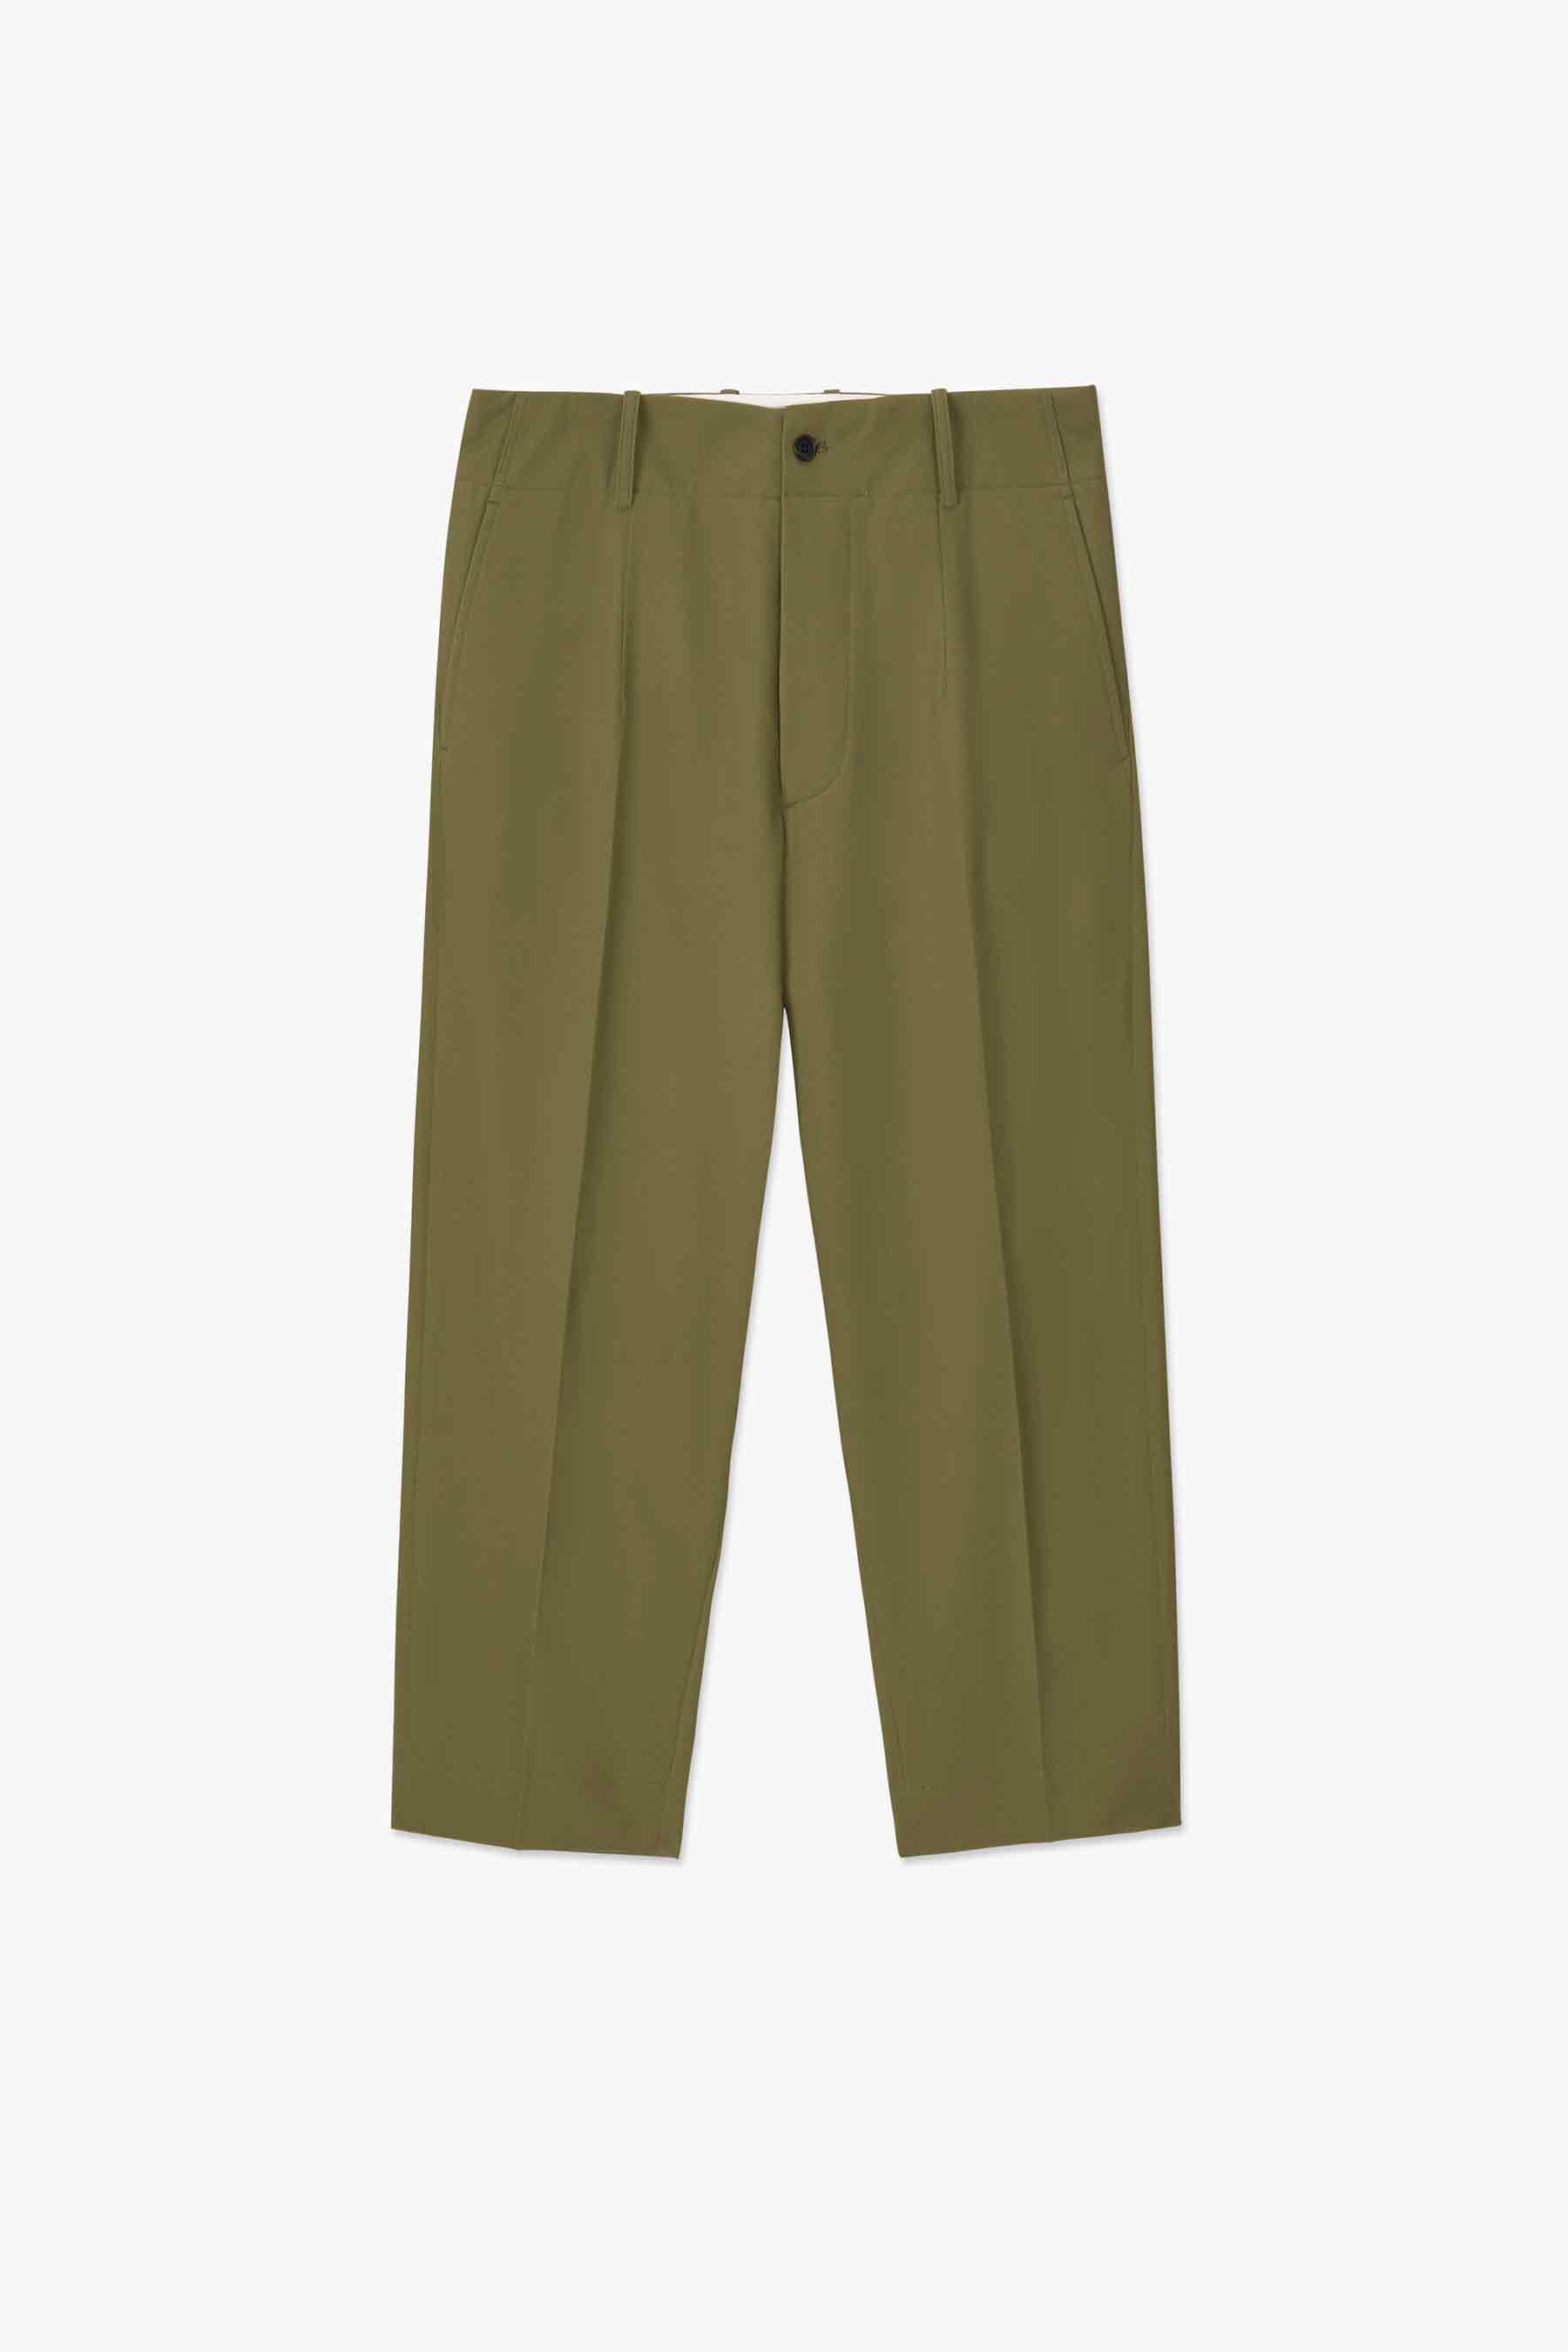 KHAKI COMFORT TAPERED SILICONE DIPING PANTS